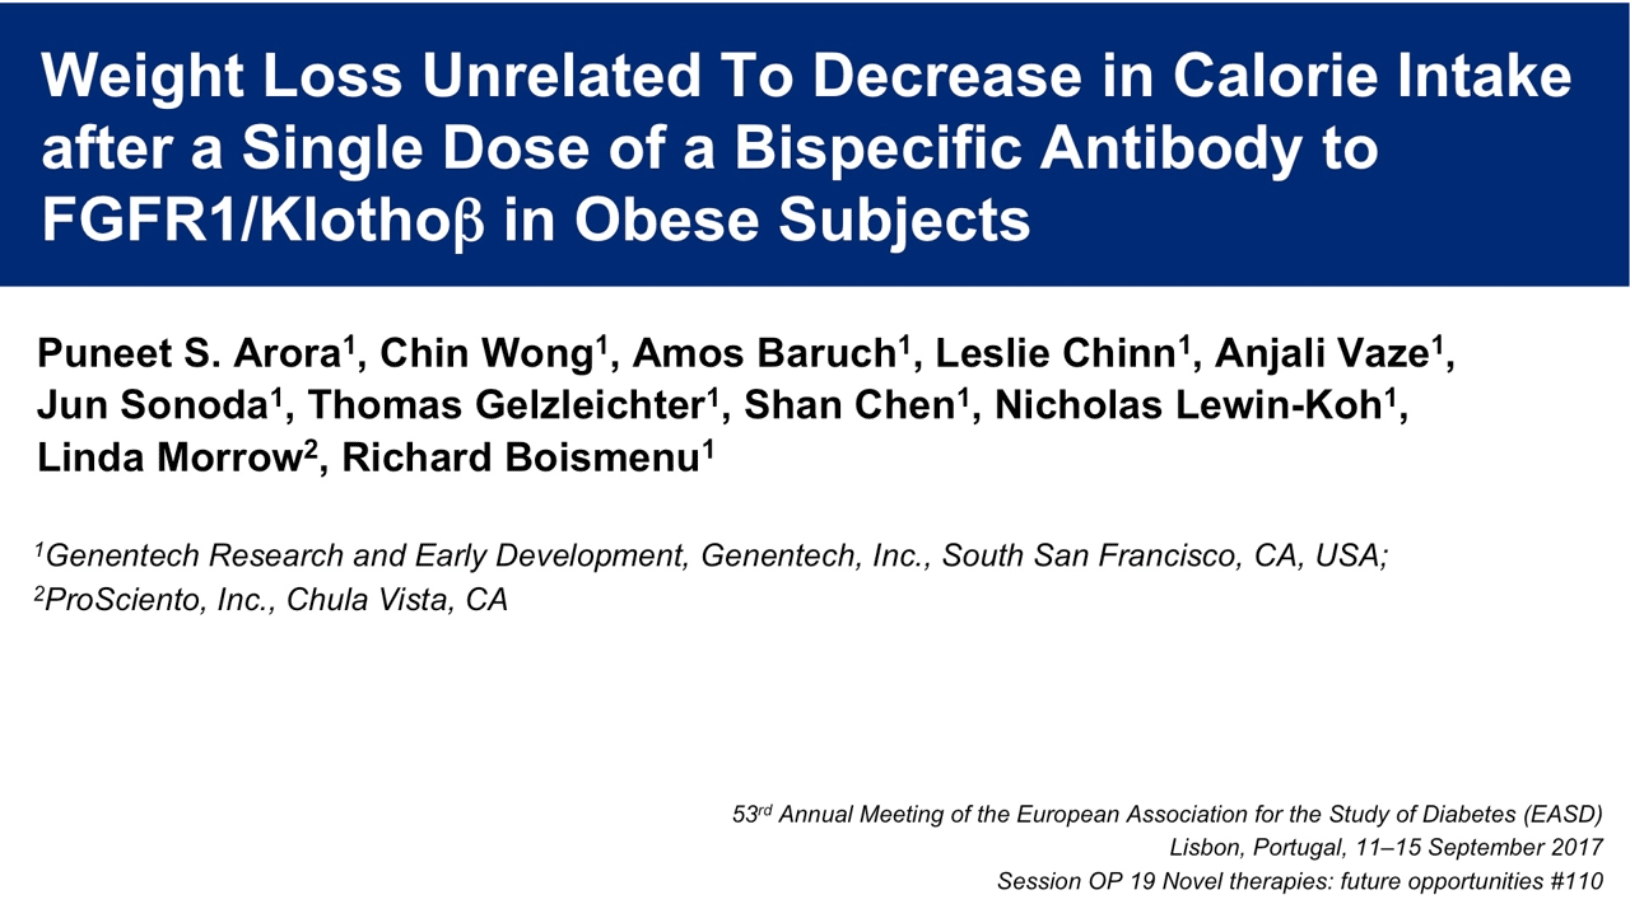 image of Weight loss unrelated to decrease in calorie intake after a single dose of a bispecific antibody to FGFR1/Klothoβ in obese subjects